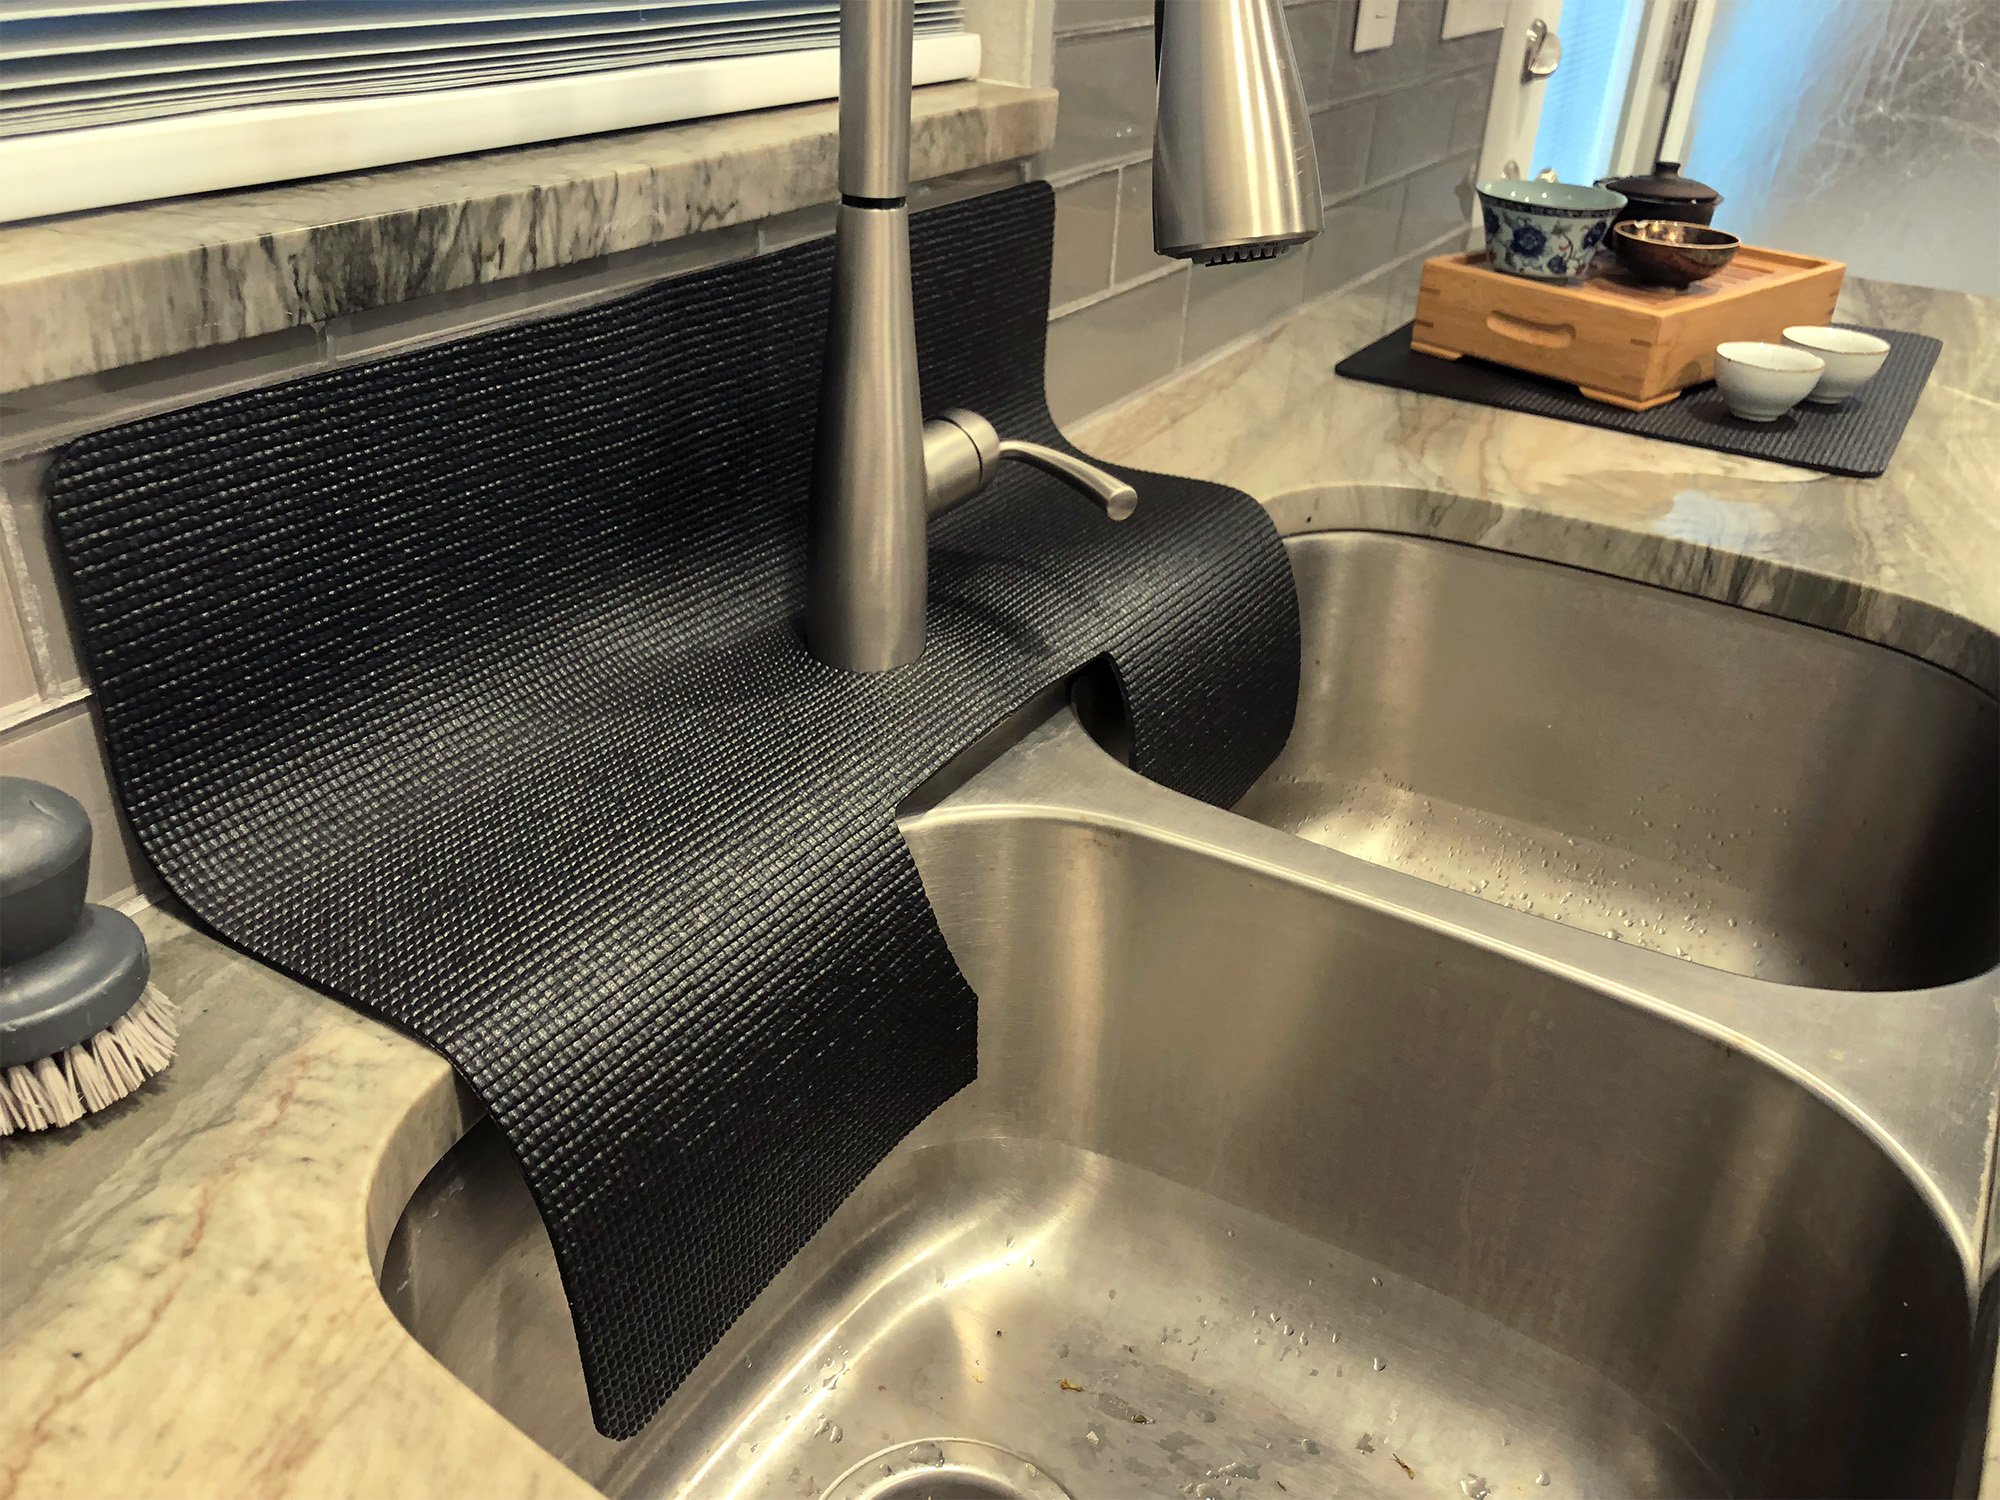 KITCHEN SINK EDGE GUARD, protects sink edge from chipping and water damage  — Comfy Kitchen Creations